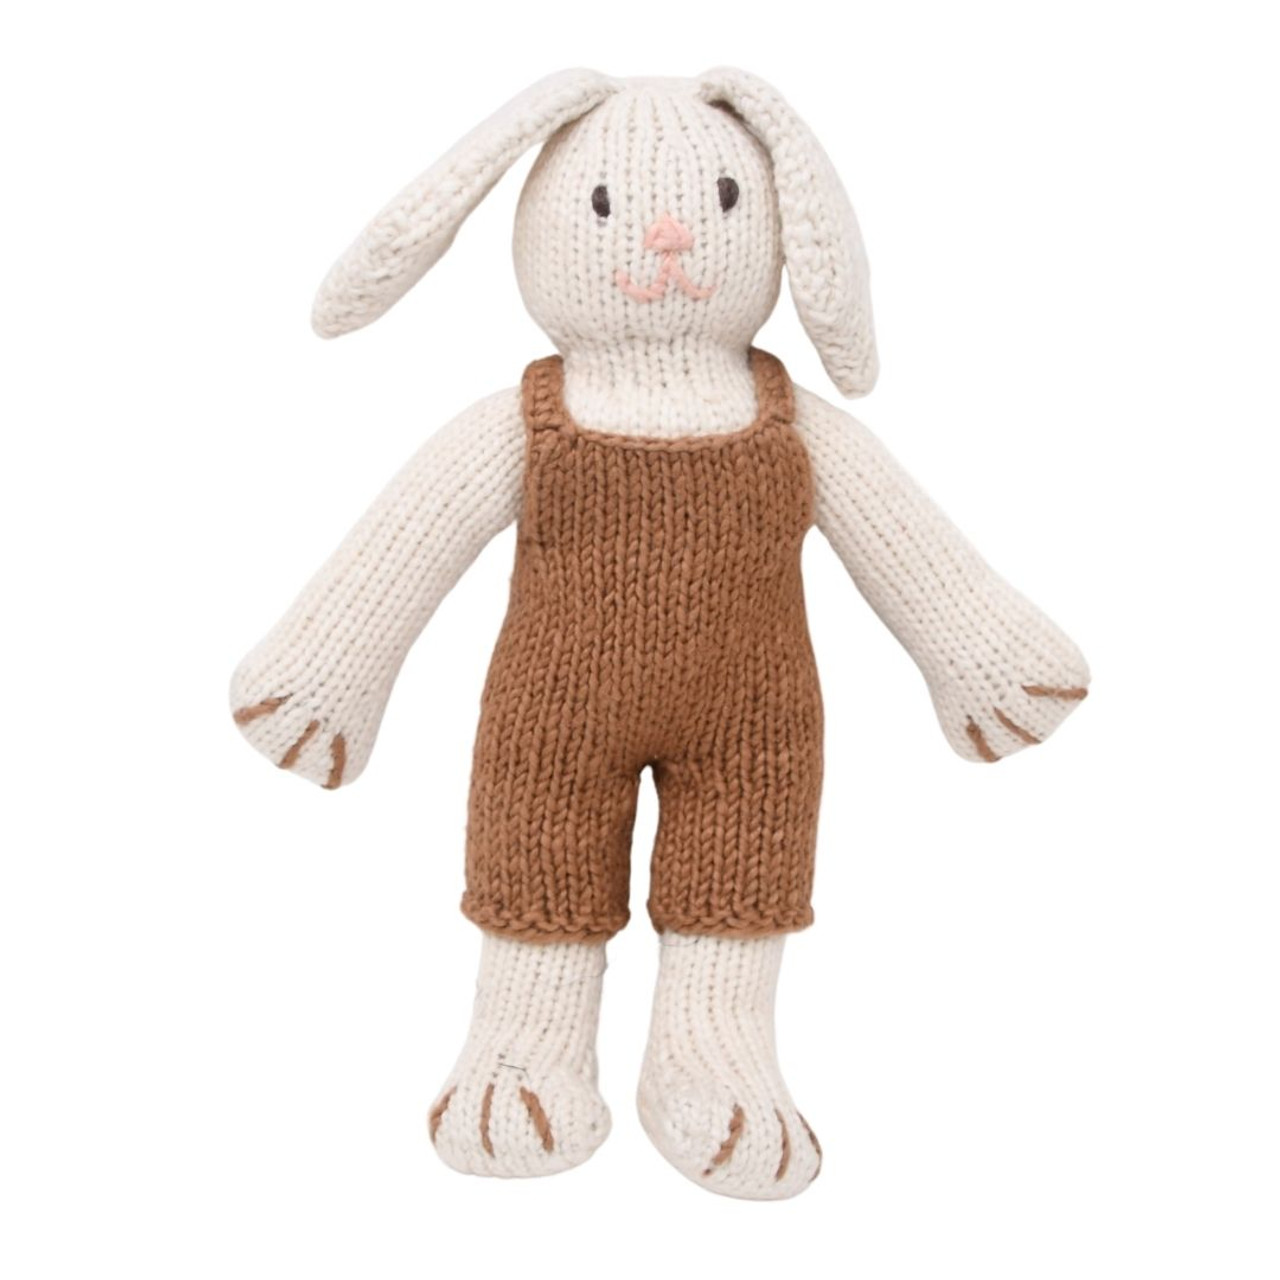 Organic Stuffed Bunny in Overalls - Aster